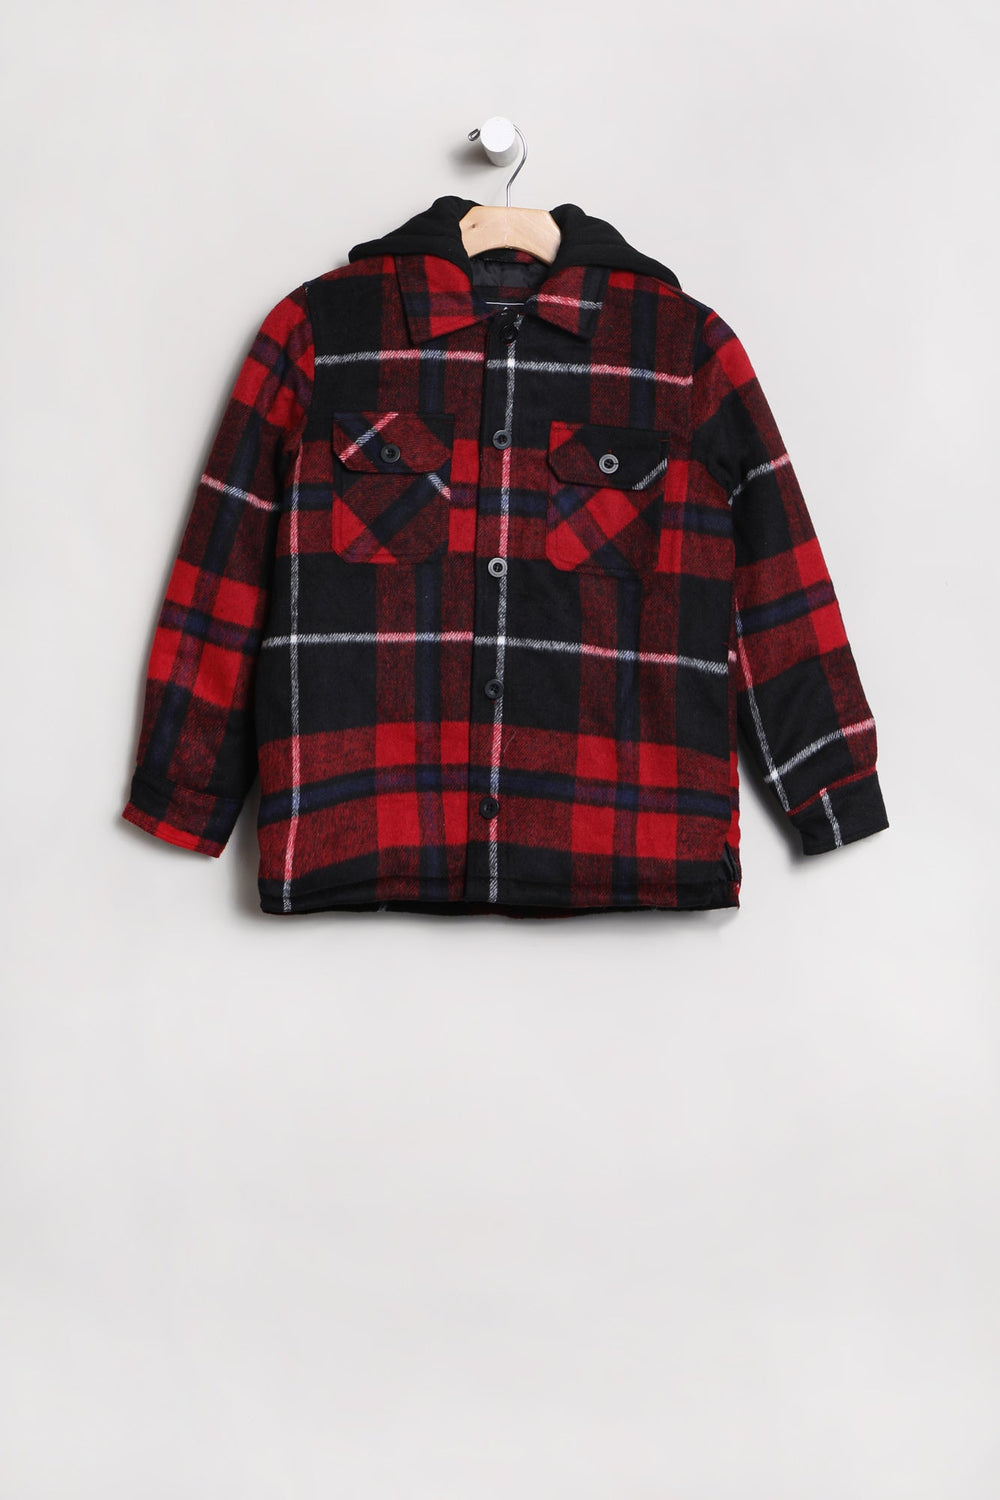 West49 Youth Lined Flannel Shacket Red